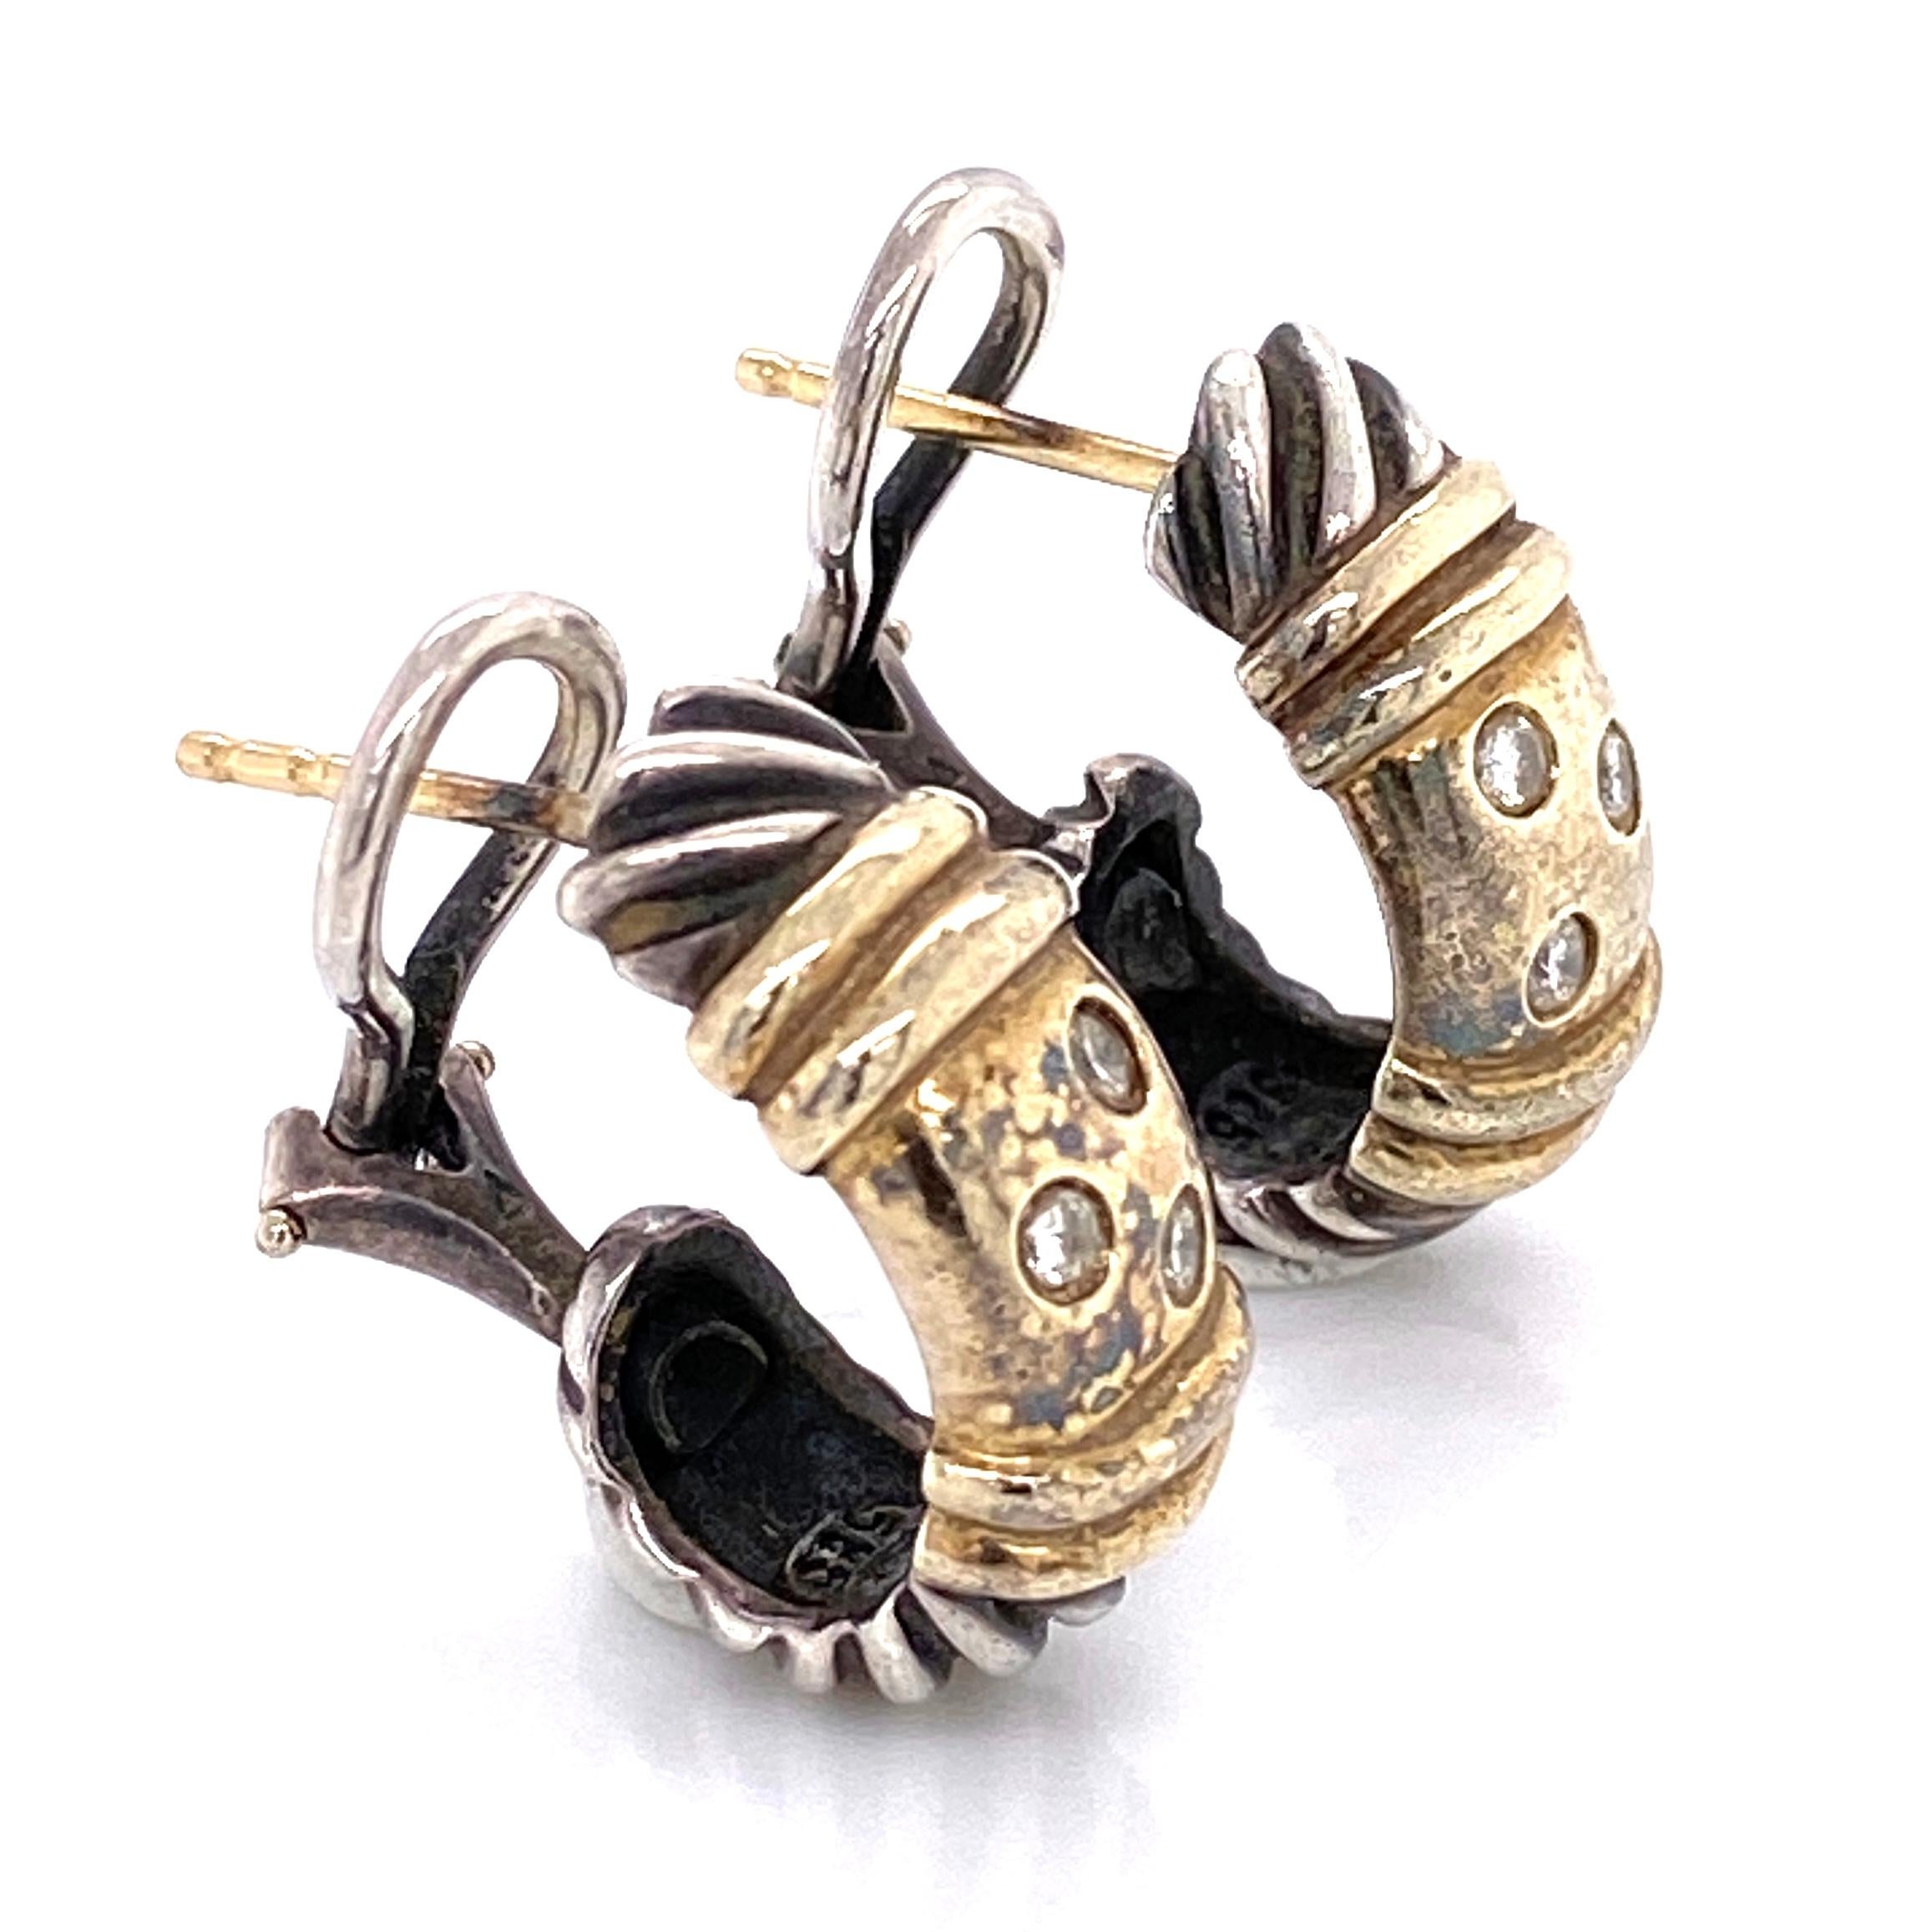 Awesome and finely detailed Iconic DAVID YURMAN Metro Clip Earrings set with Diamonds weighing approx. 0.15 carats. Hand crafted in 14 Karat Gold and 925 Sterling Silver. Signed: D. YURMAN 925 585. The earrings are in excellent condition and were